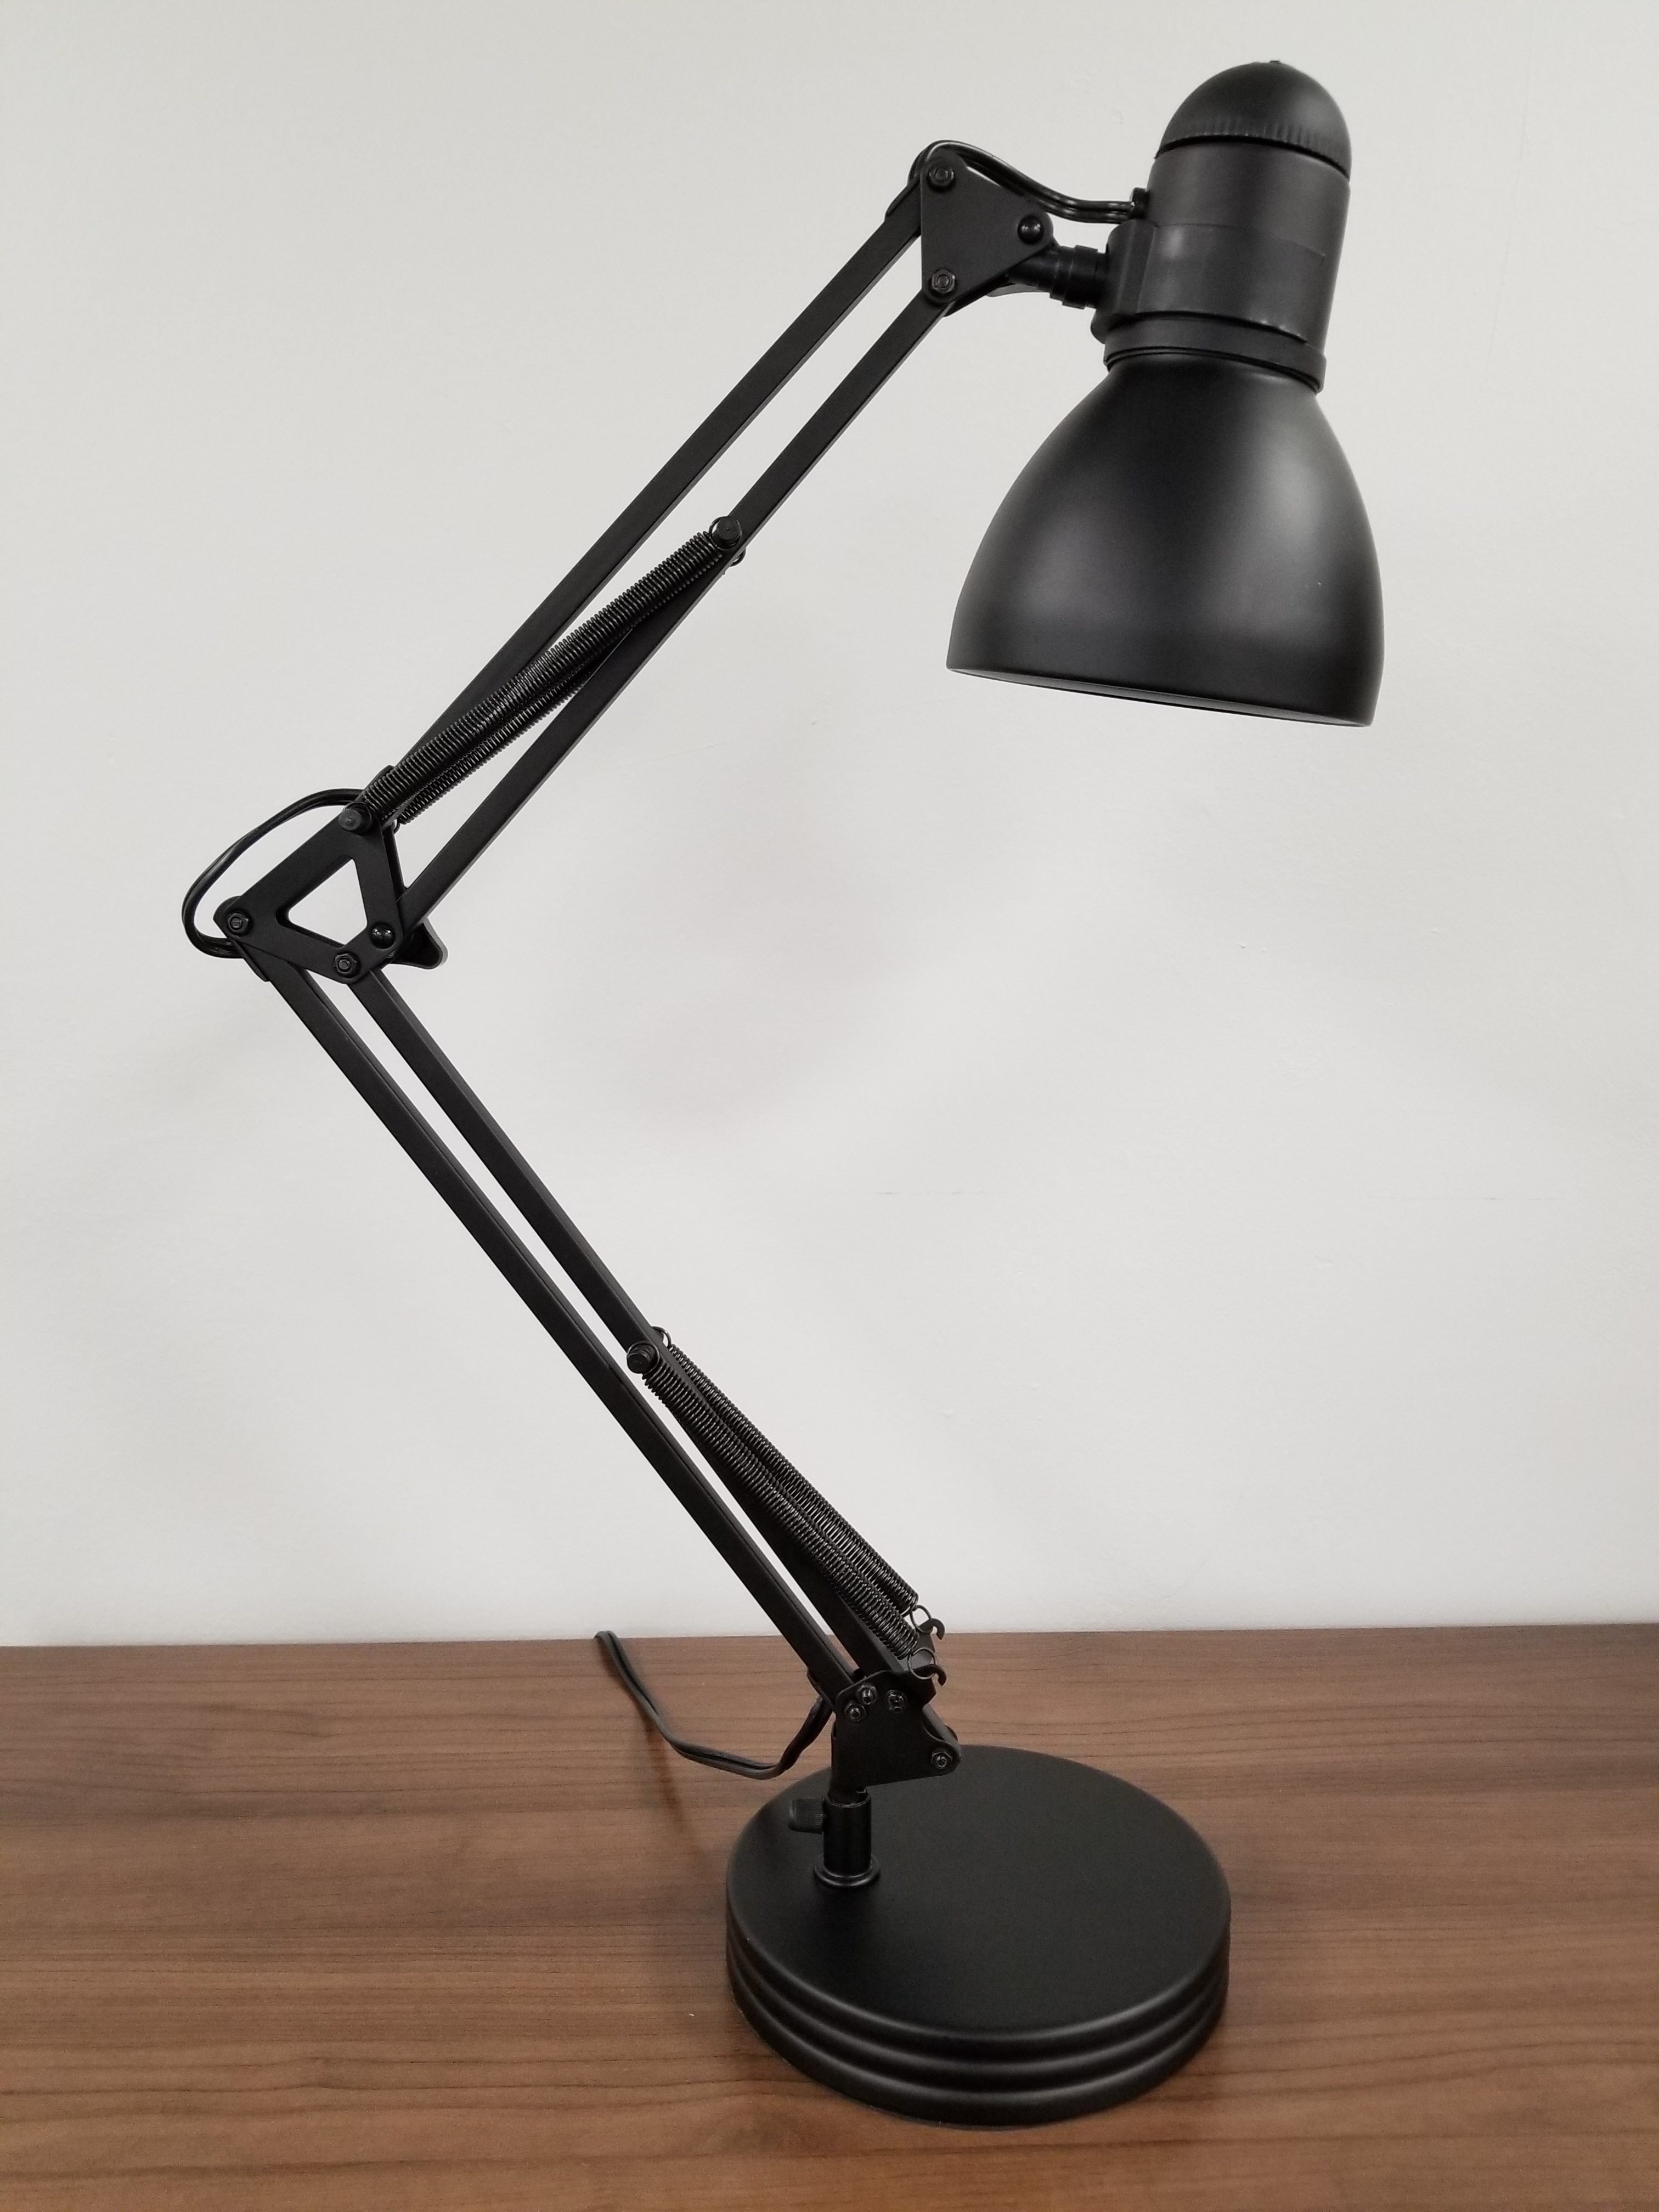 Adjustable Desk Lamps In Black Office, Table Lamps Chicago Il